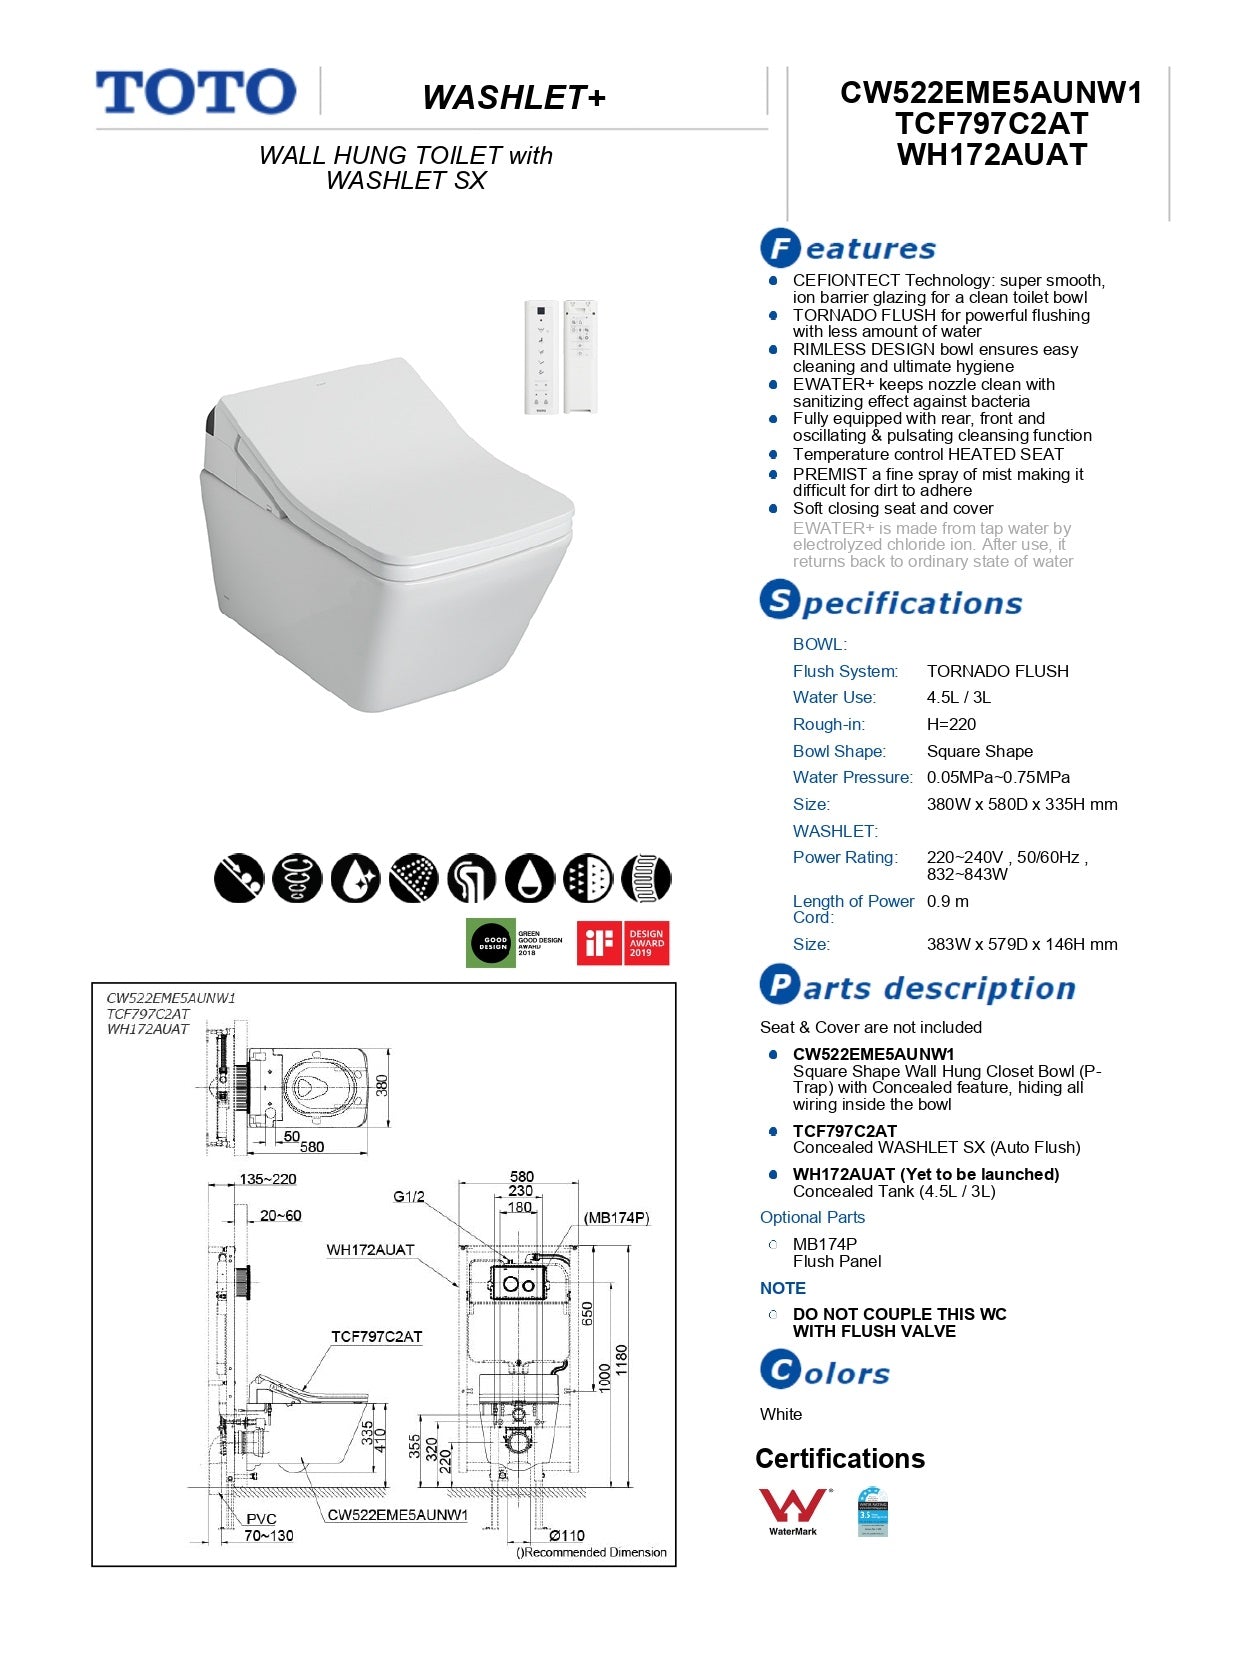 TOTO SX WALL HUNG TOILET WITH WASHLET W/ REMOTE CONTROL PACKAGE GLOSS WHITE